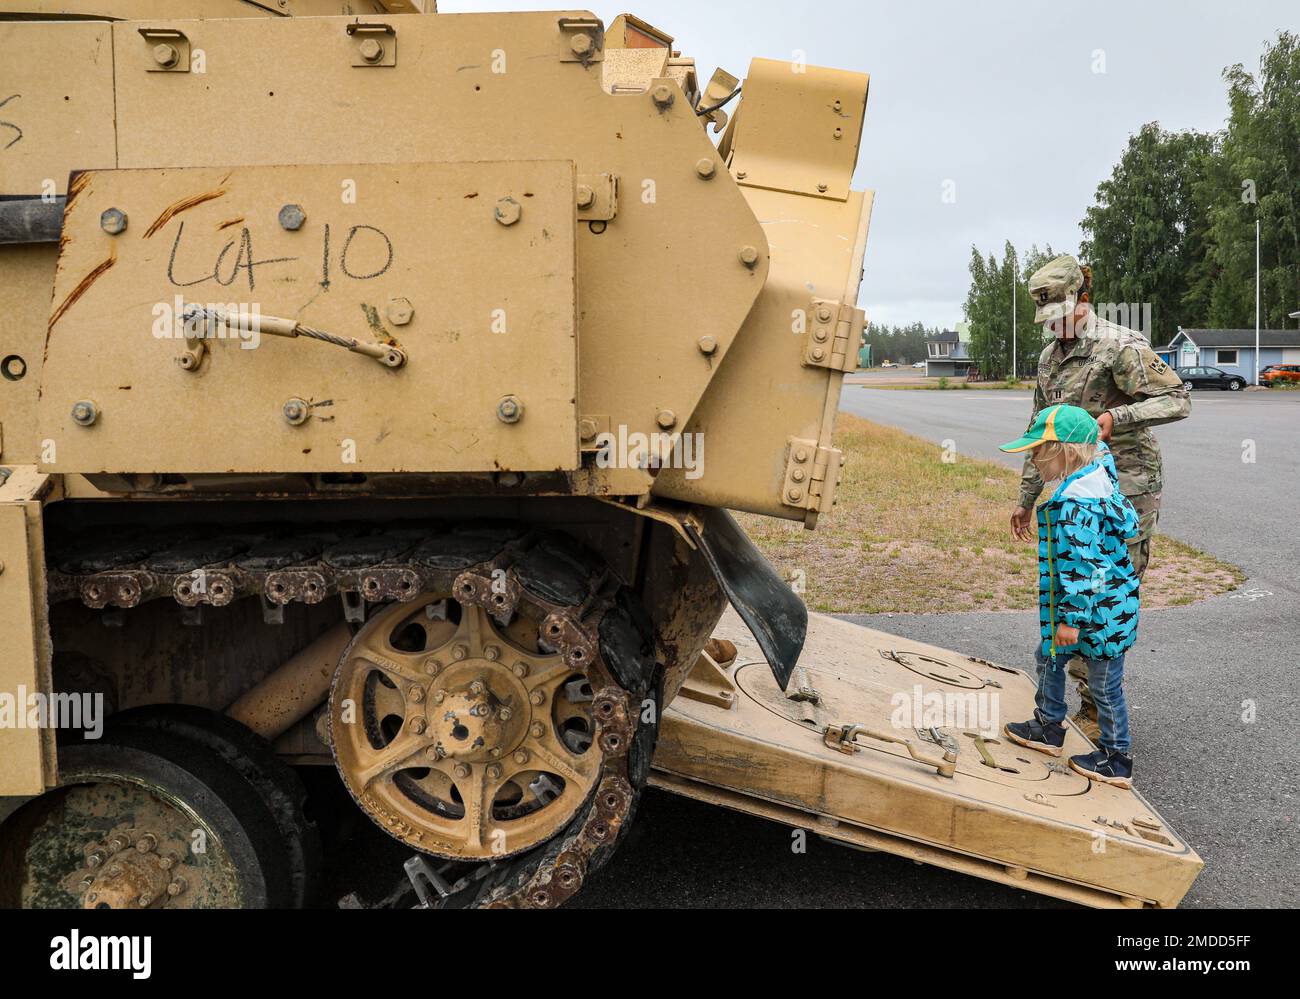 U.S. Army Capt. Paris Scroggins, assigned to the 3rd Armored Brigade Combat Team, 4th Infantry Division, escorts a child onto a U.S. Army M2 Bradley Fighting Vehicle during the Oripää Airshow at Säkylä, Finland, July 16, 2022. The 3rd Armored Brigade Combat Team, 4th Infantry Division, and the Pori Brigade of the Finnish army began summer training in Finland to strengthen relations and help build interoperability between the two nations. Stock Photo